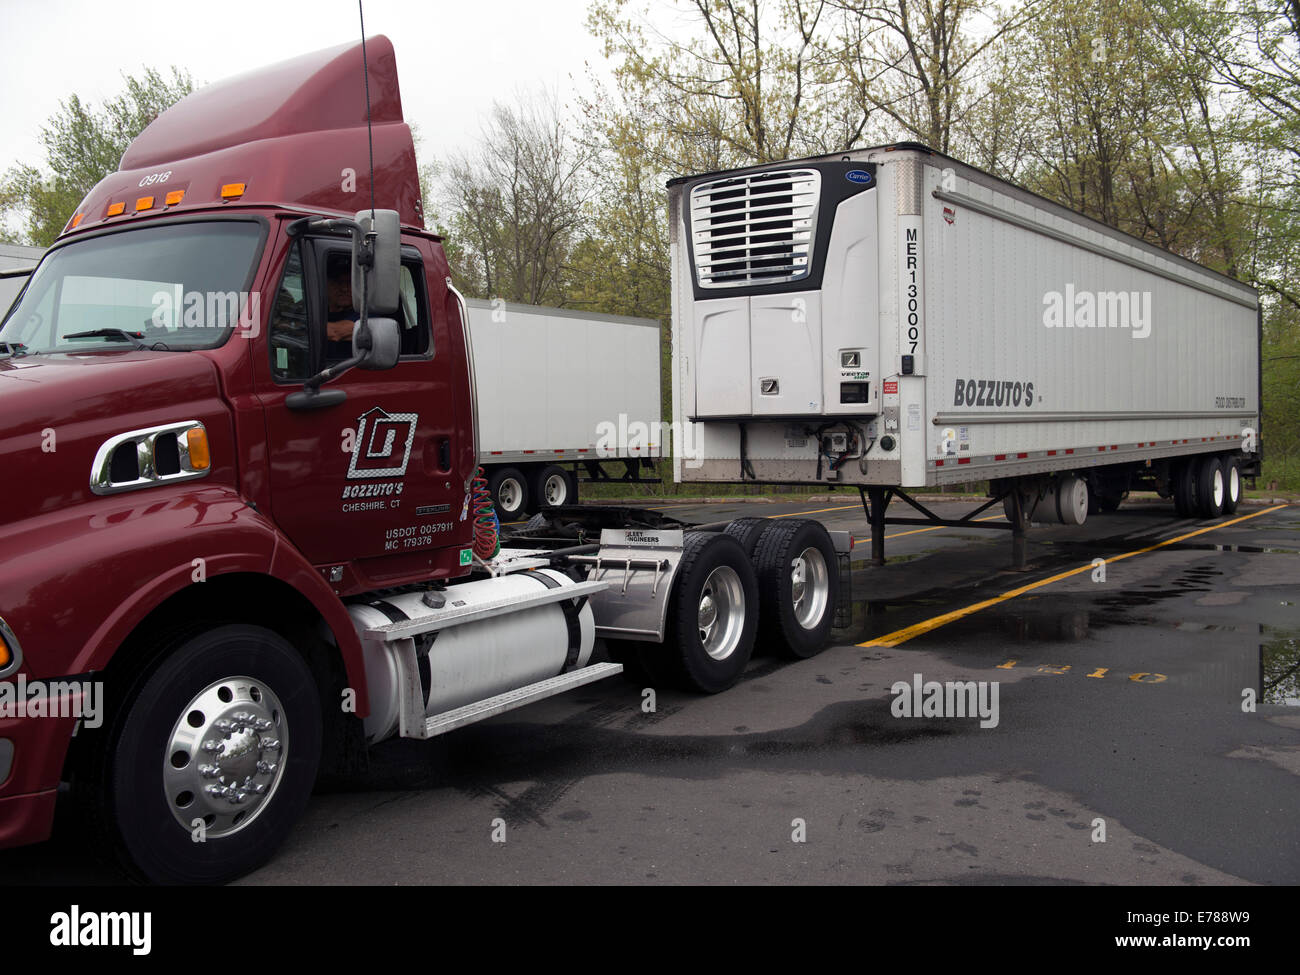 Tractor truck backing up to hook up trailer  at Bozzuto's Distribution center. Stock Photo